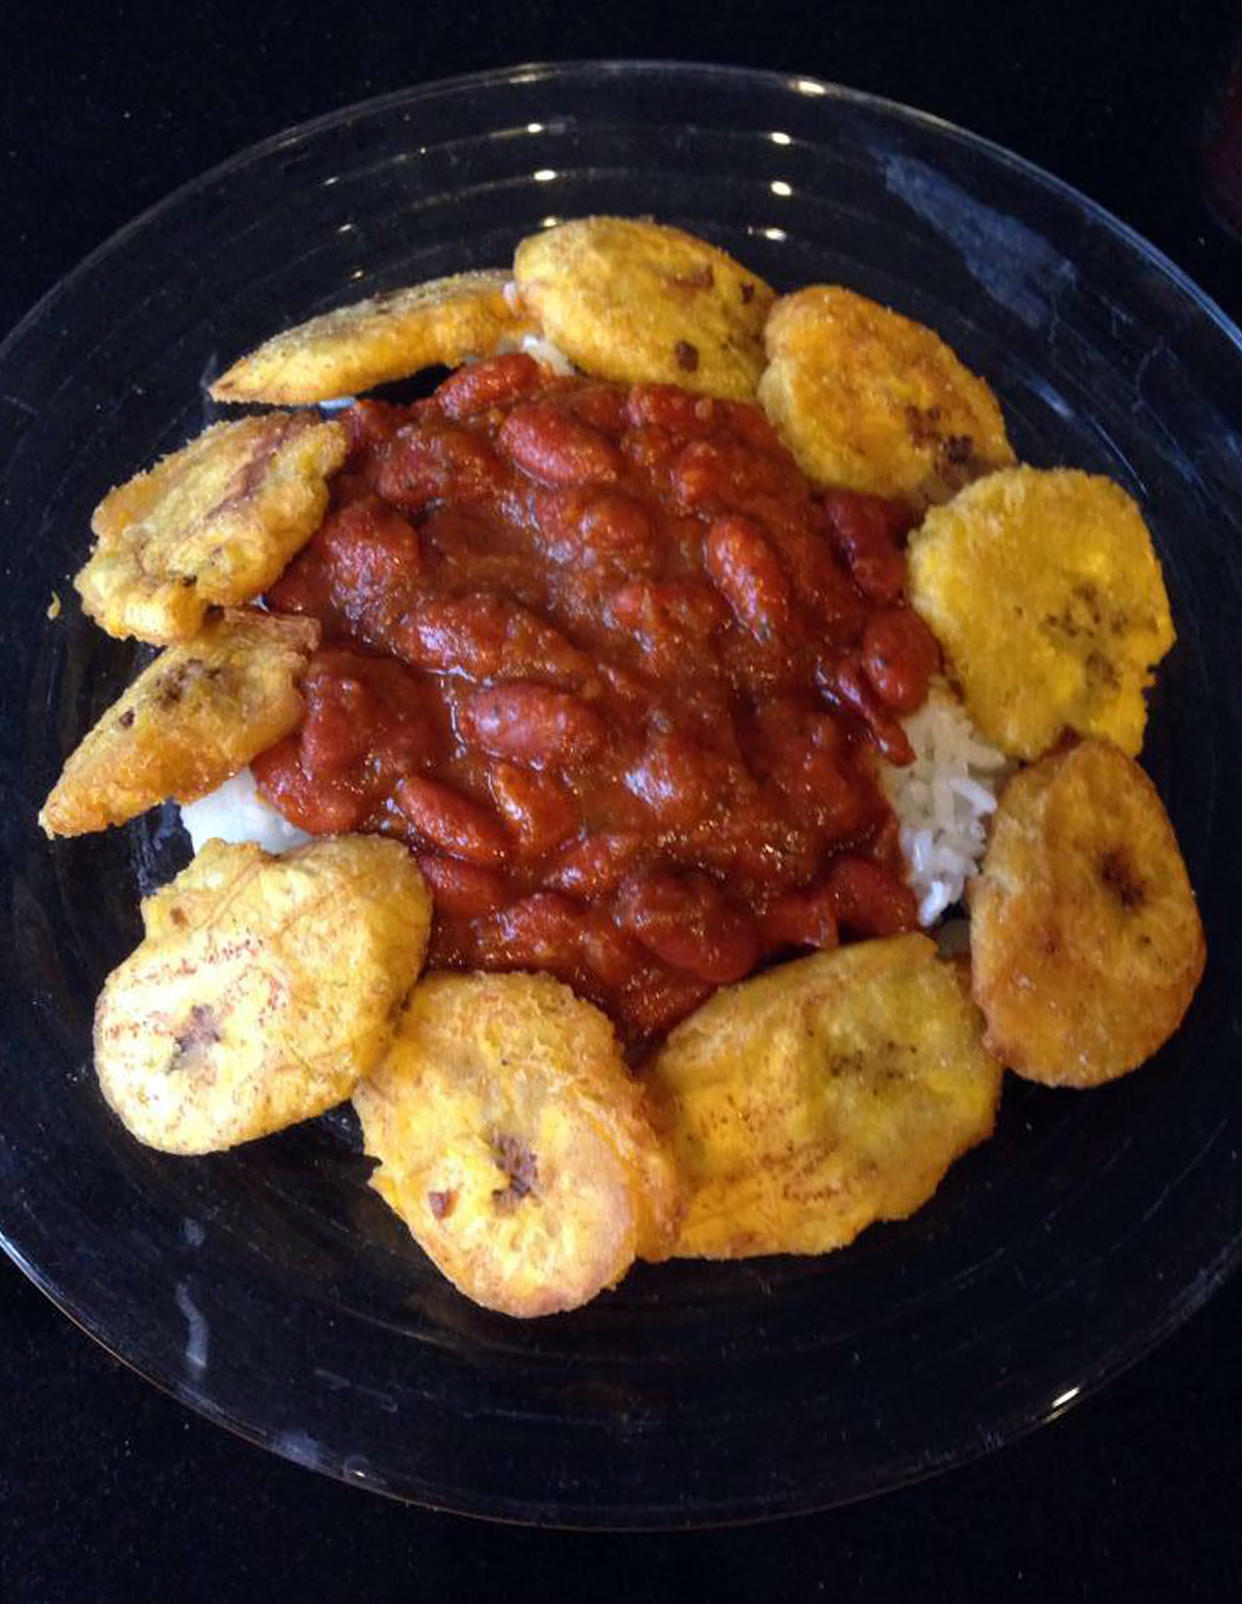 Another family favorite: red beans and rice with tostones.  (Courtesy Danielle Campoamor)